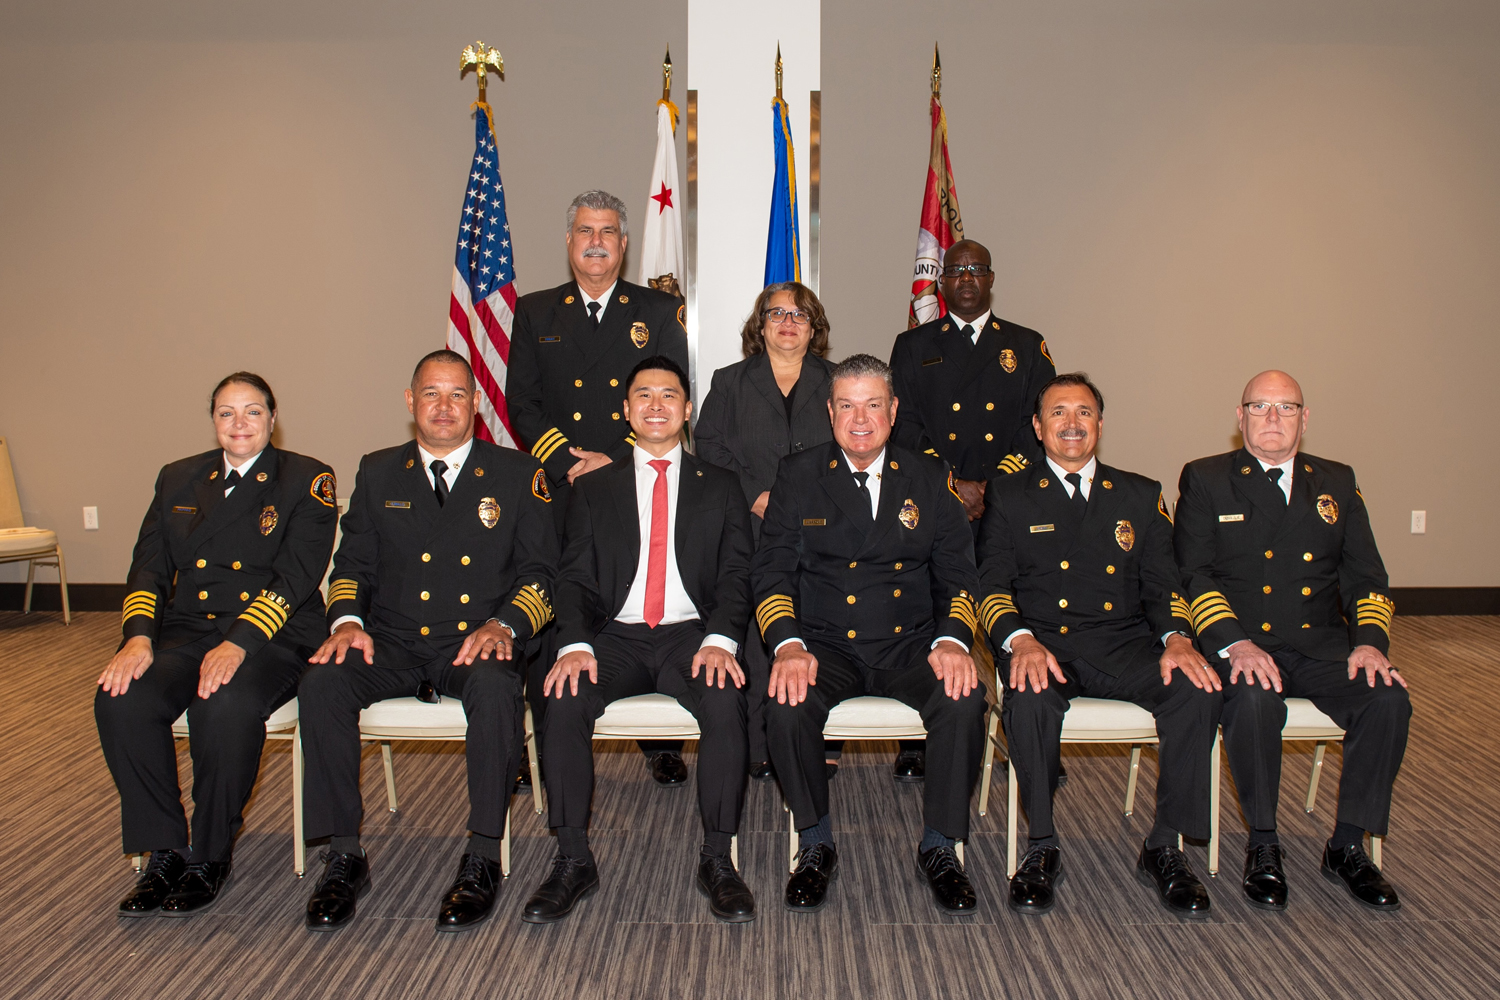 On Wednesday, September 21, 2022, the Los Angeles County Fire Department (LACoFD) held a promotional ceremony, honoring 15 Departmental personnel in the MAYNE Events Center at the LACoFD Museum in Bellflower.